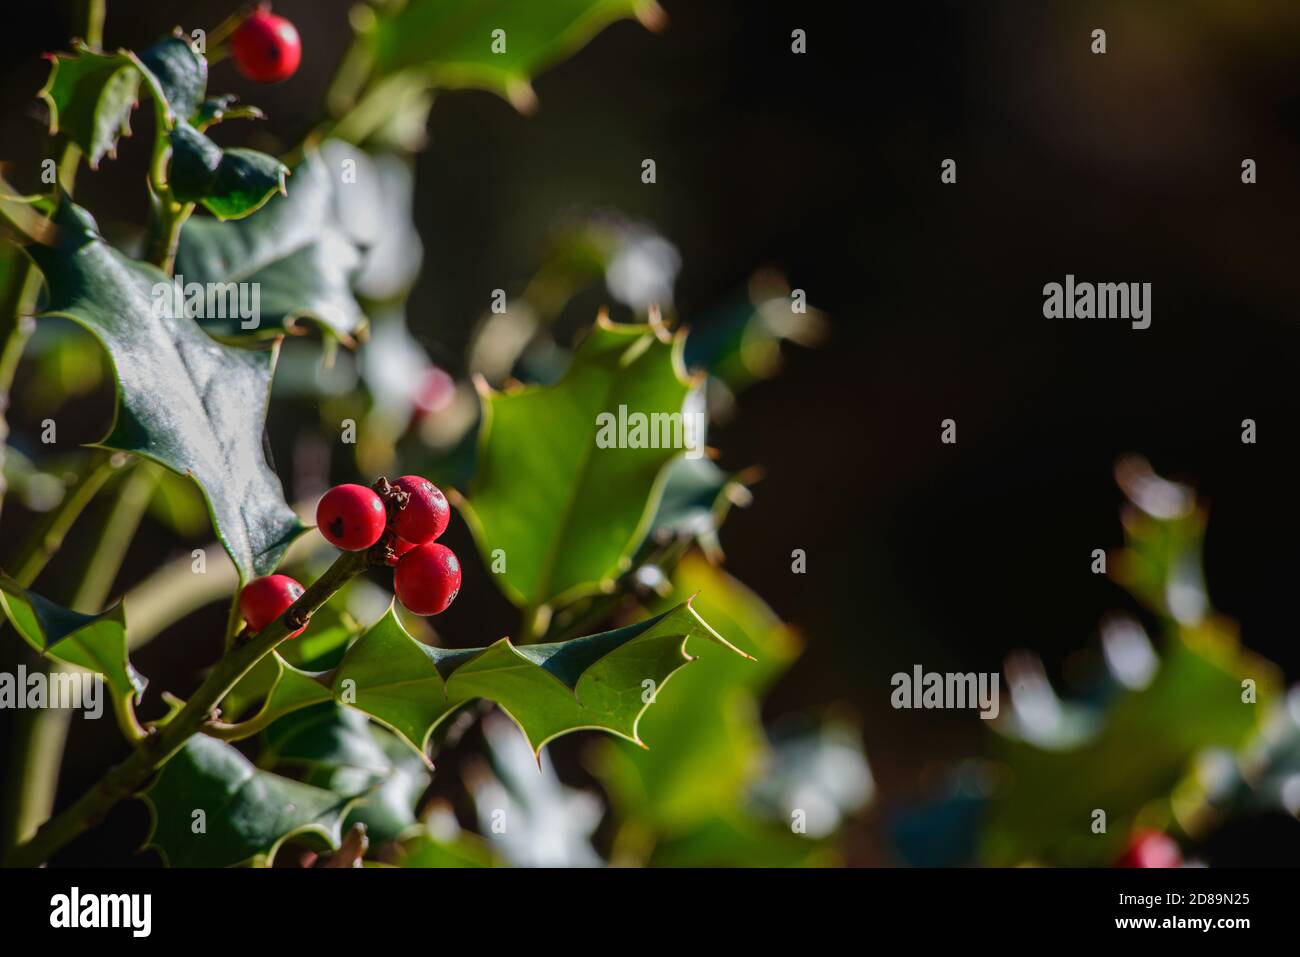 Holly berries and holly leaves Stock Photo